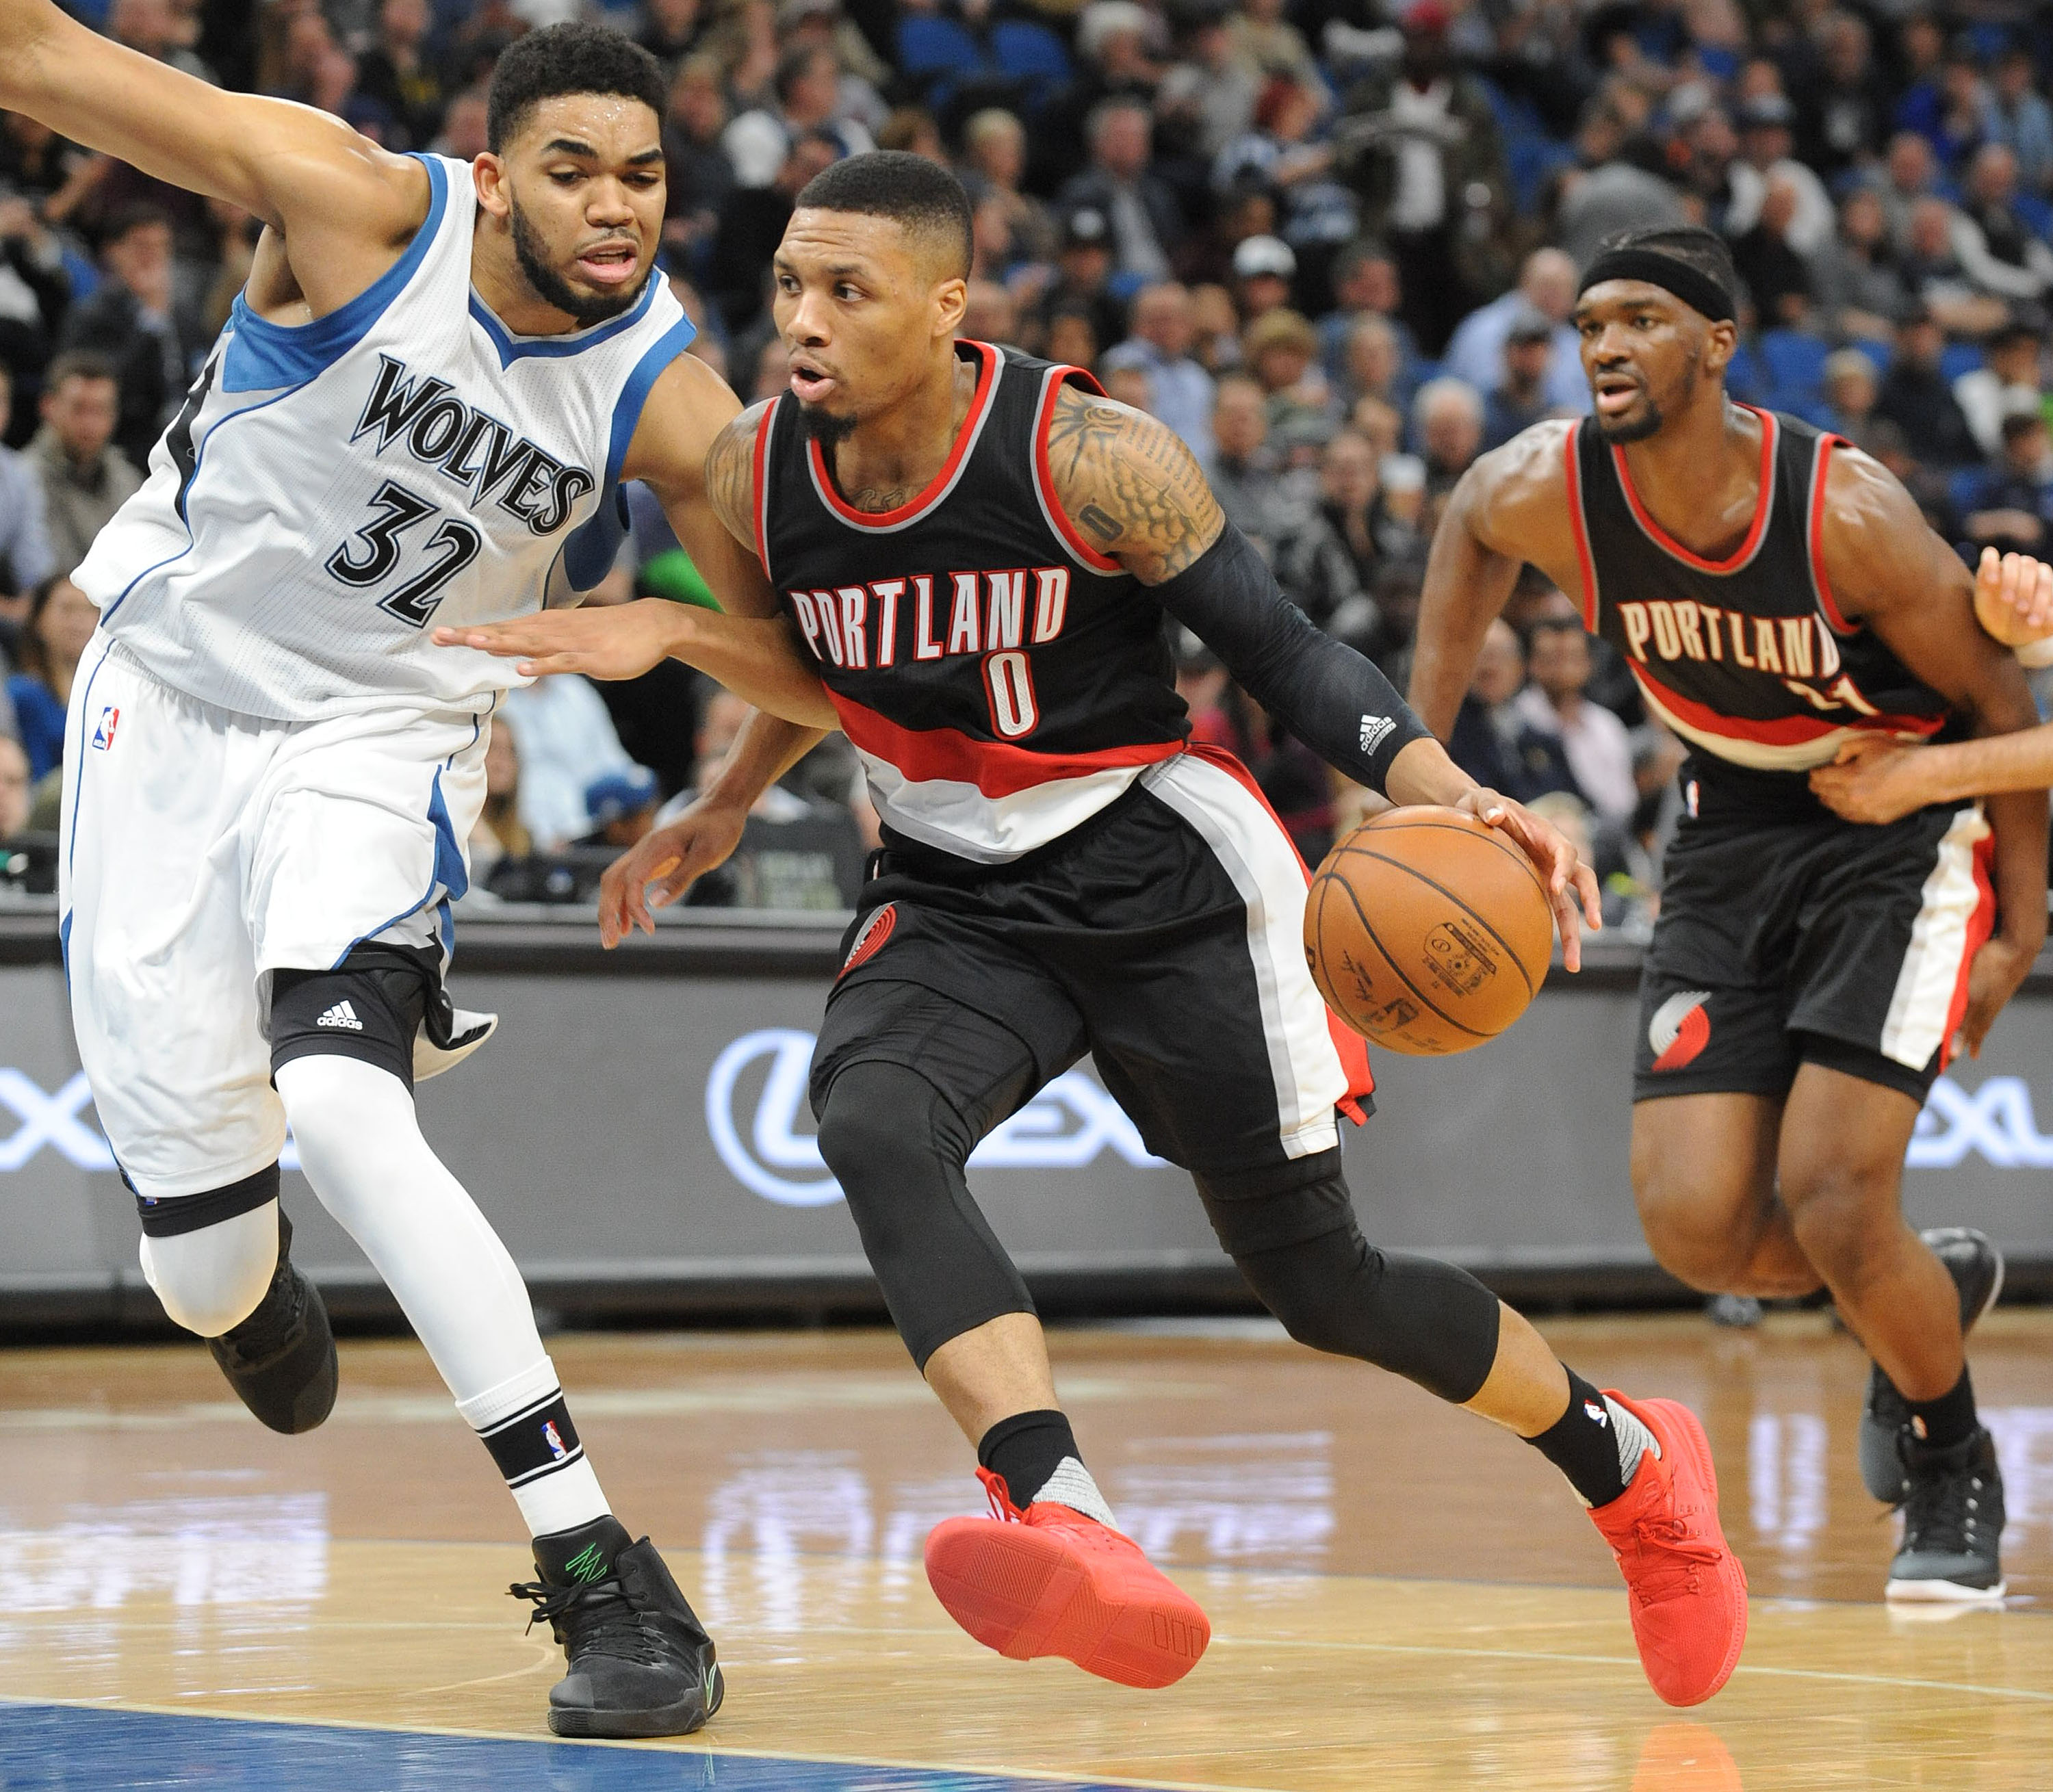 Timberwolves at Trail Blazers live stream: How to watch online